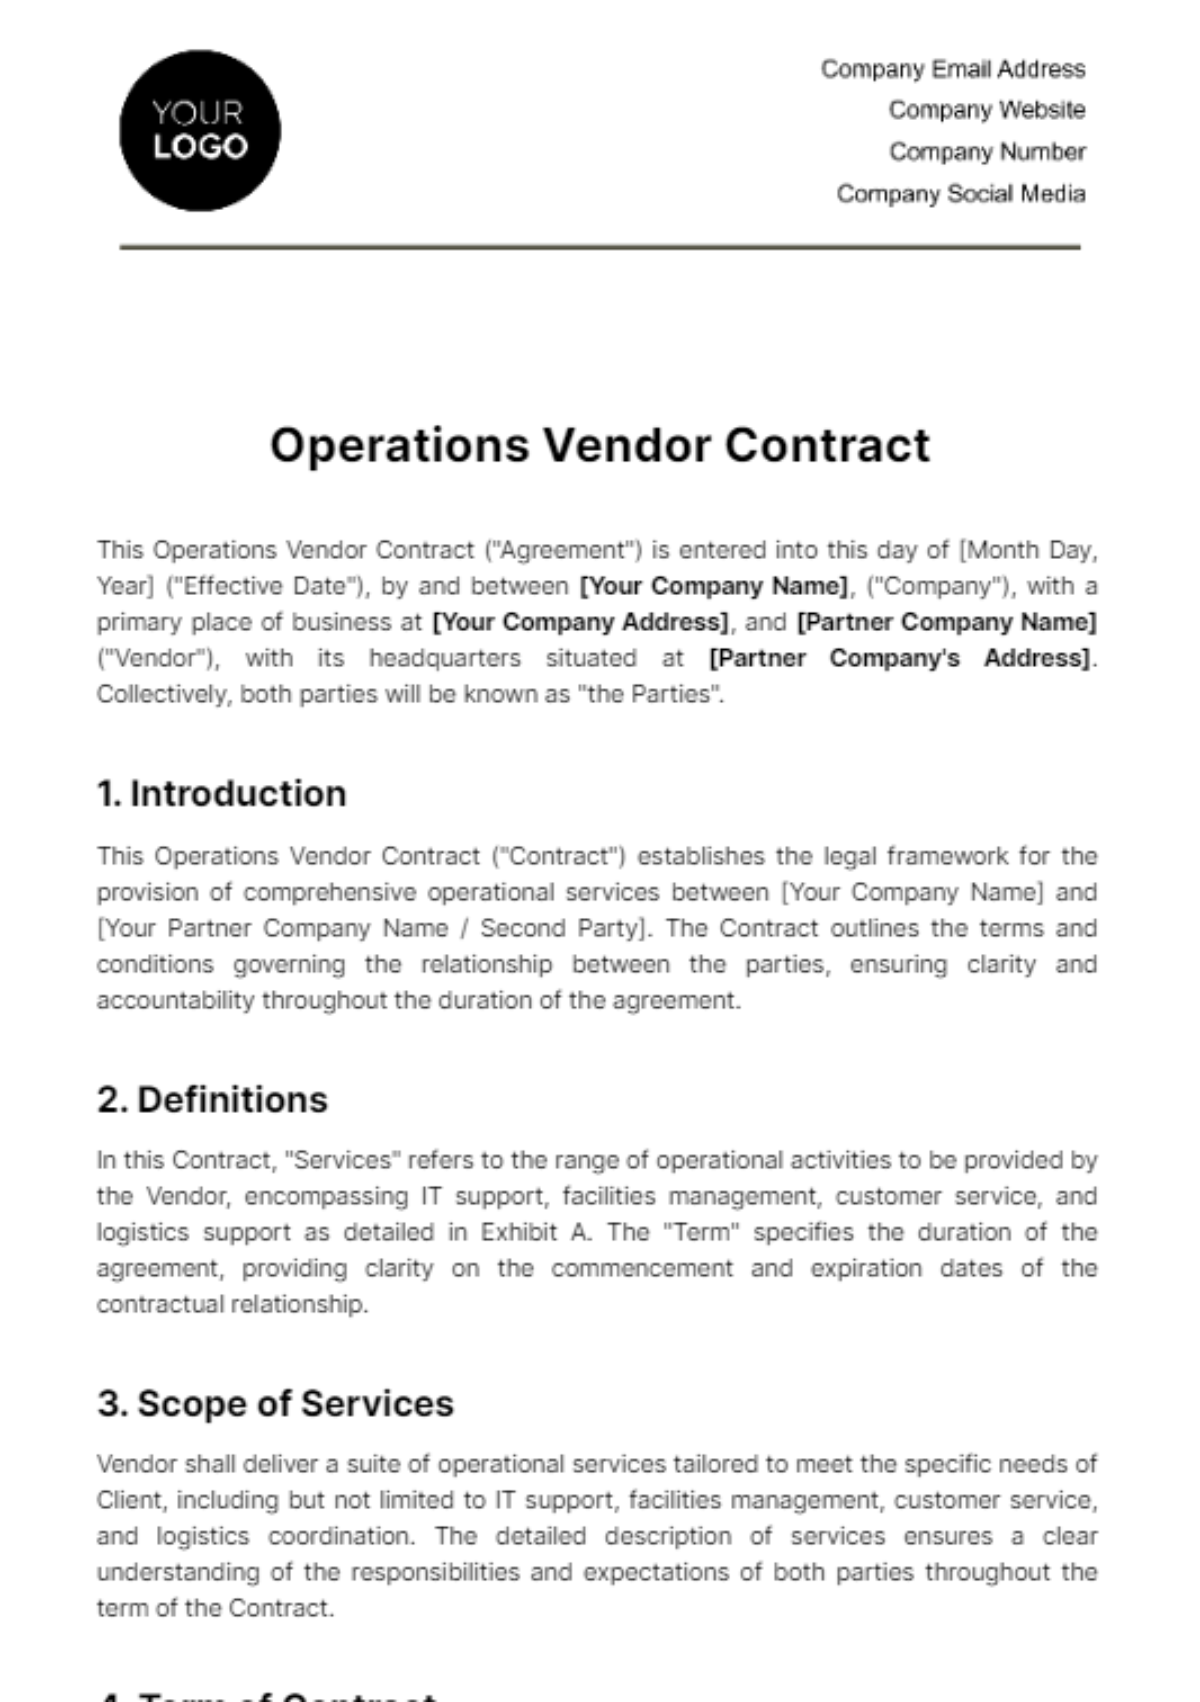 Operations Vendor Contract Template